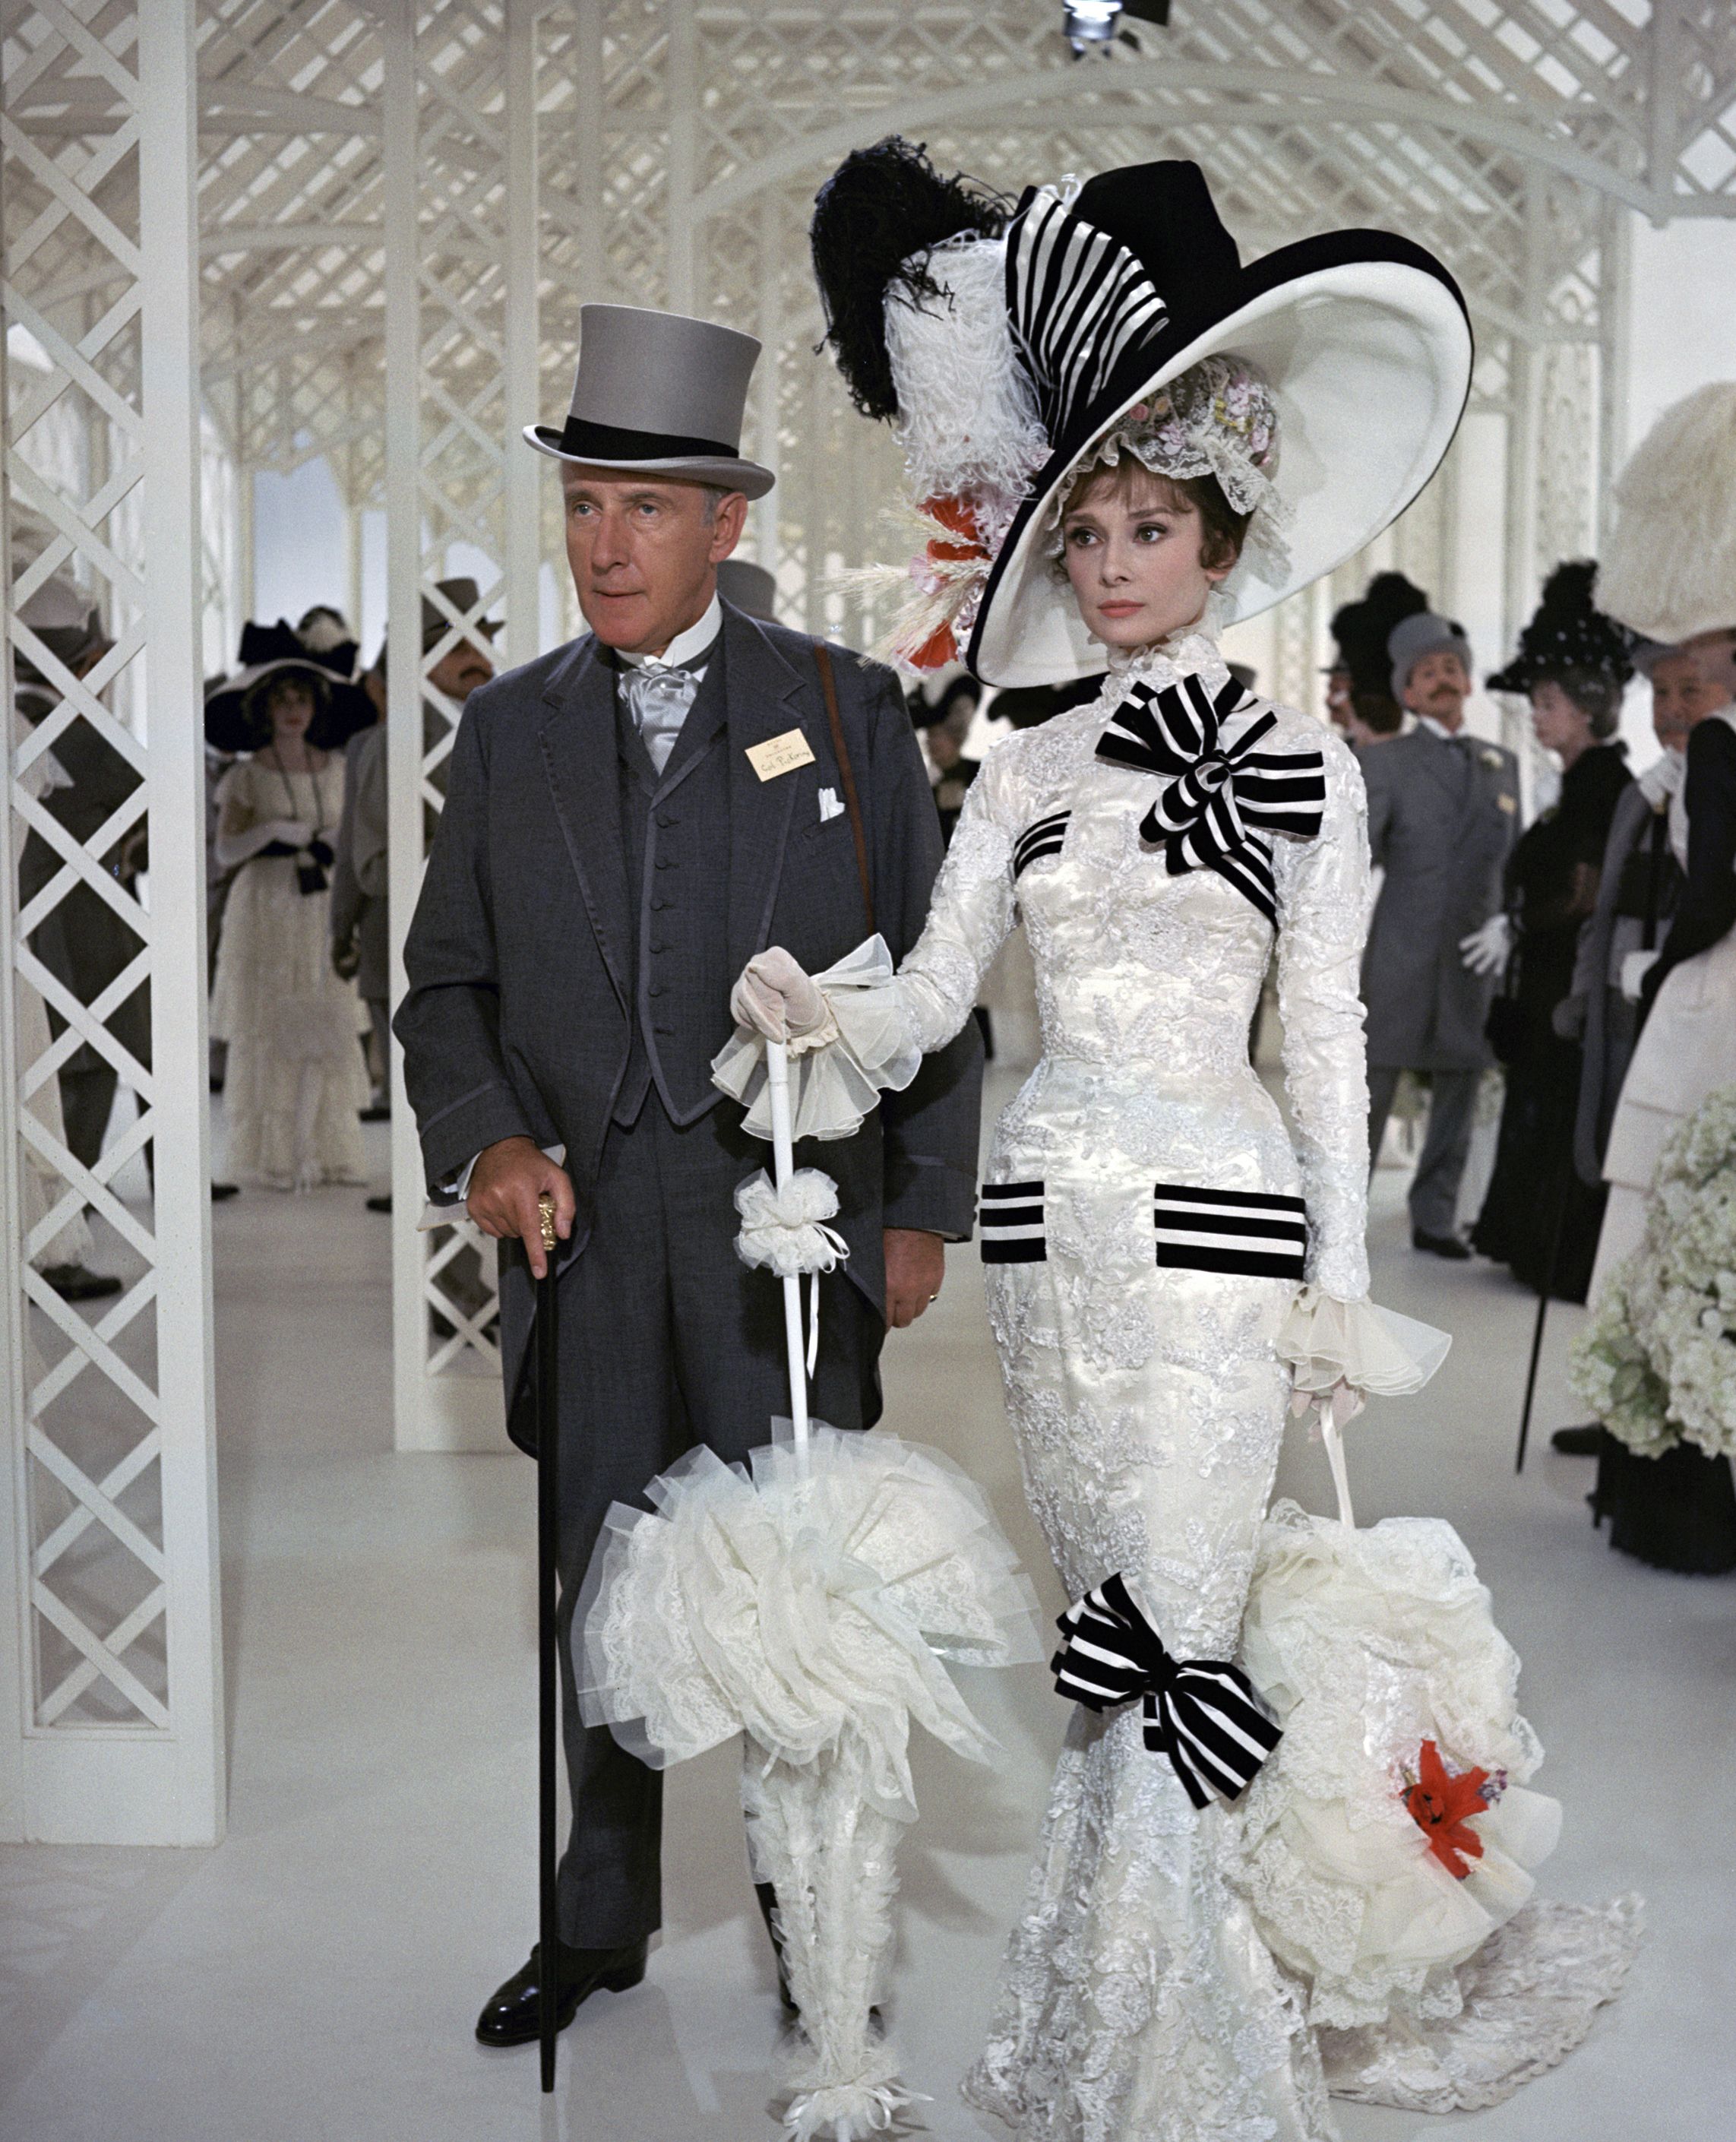 10 Most Iconic Fashion Moments of Audrey Hepburn